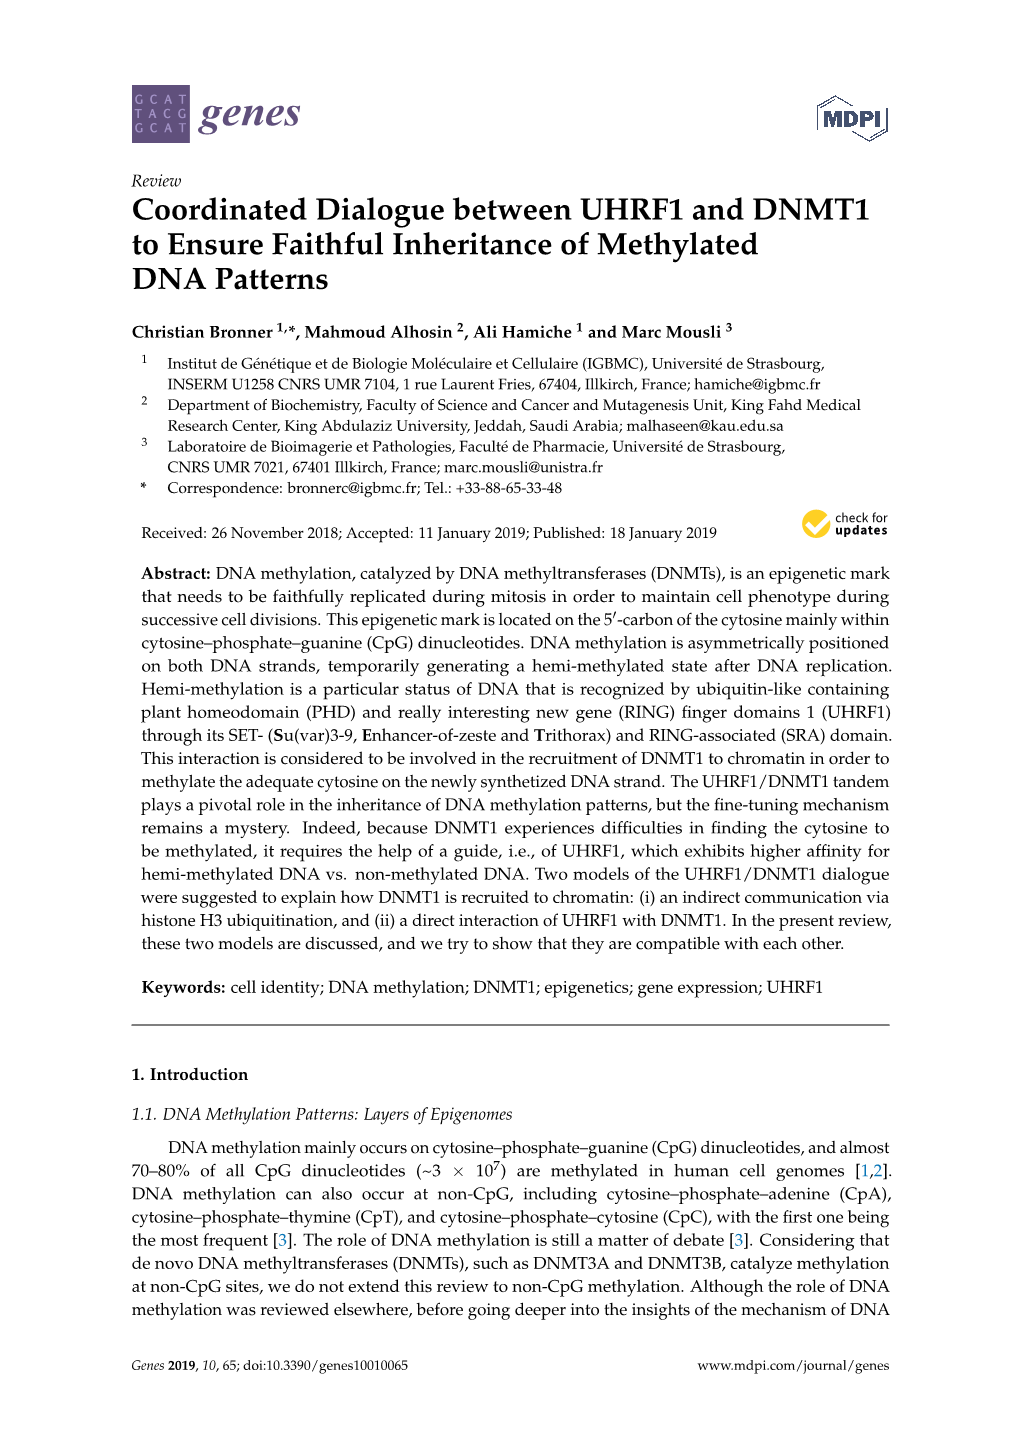 Coordinated Dialogue Between UHRF1 and DNMT1 to Ensure Faithful Inheritance of Methylated DNA Patterns